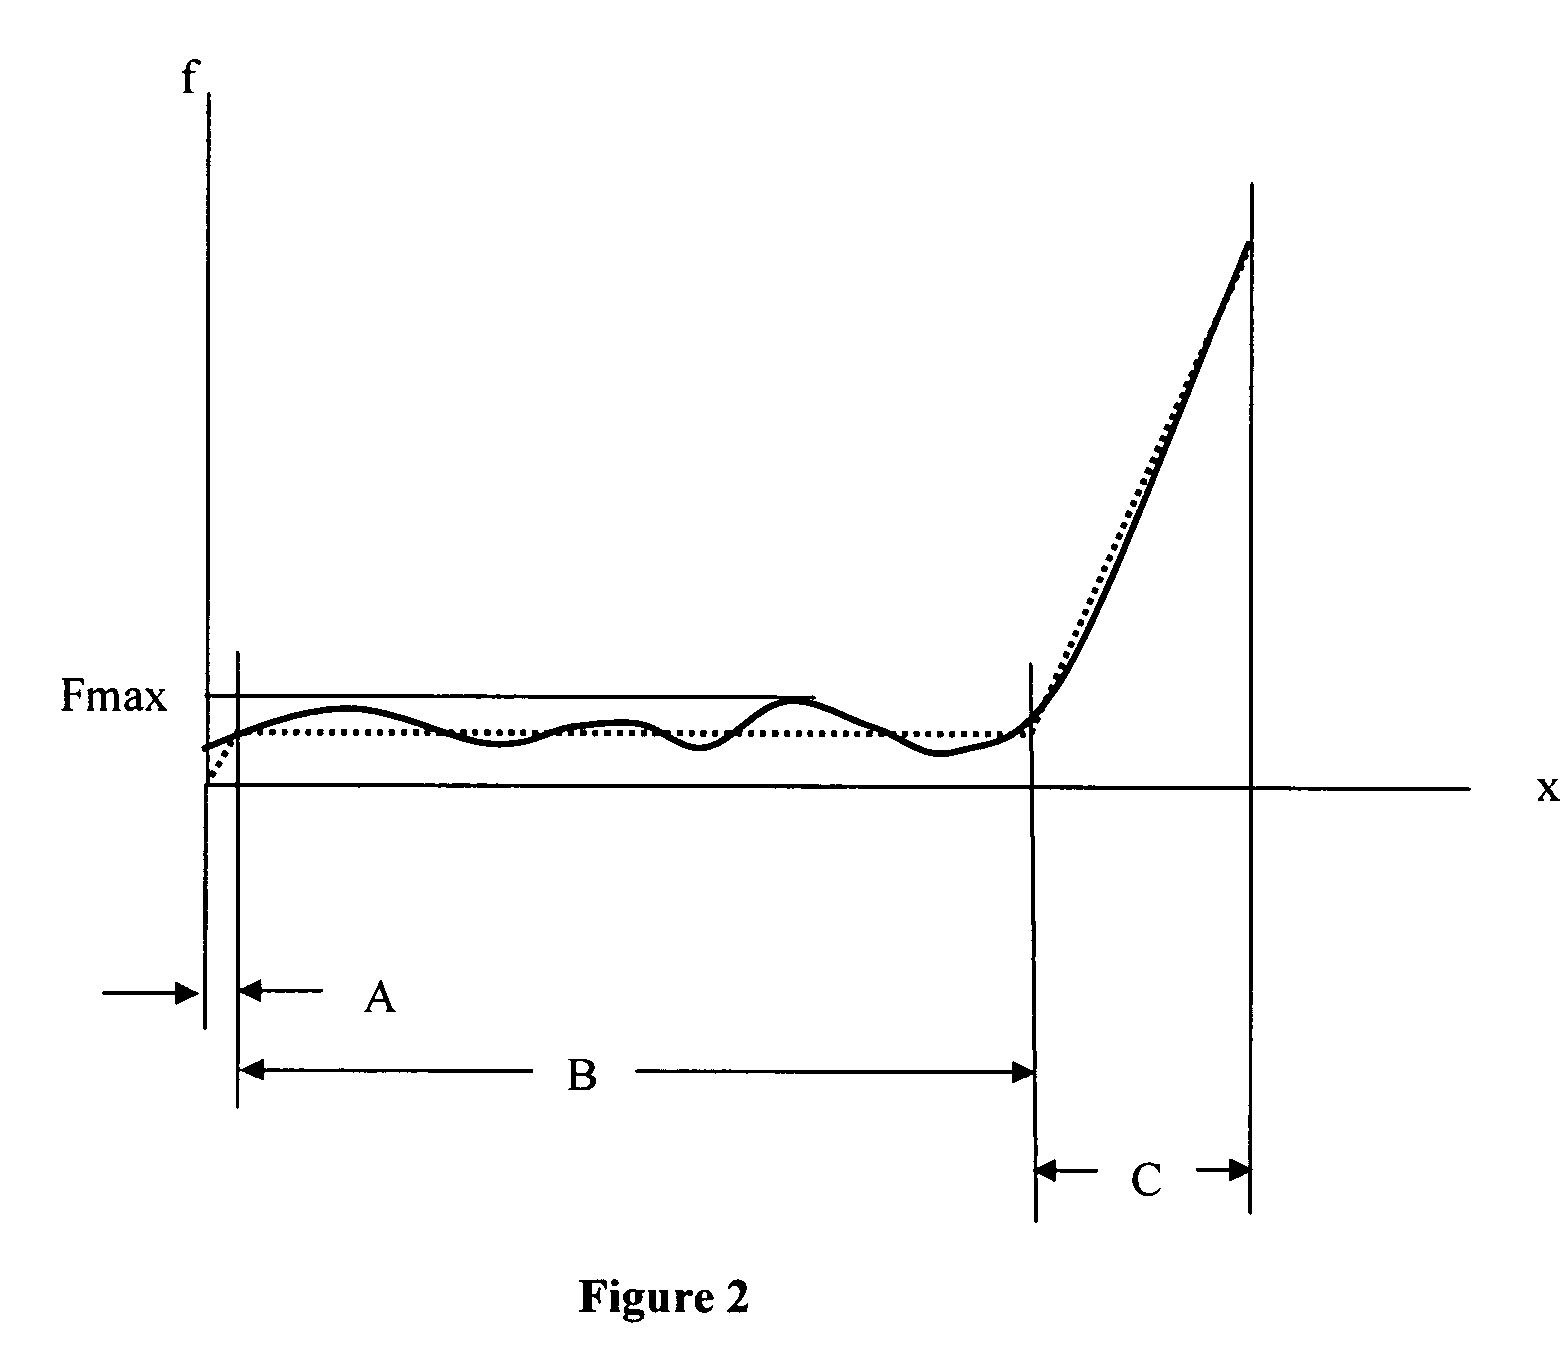 Automated packing system and method for chromatography columns